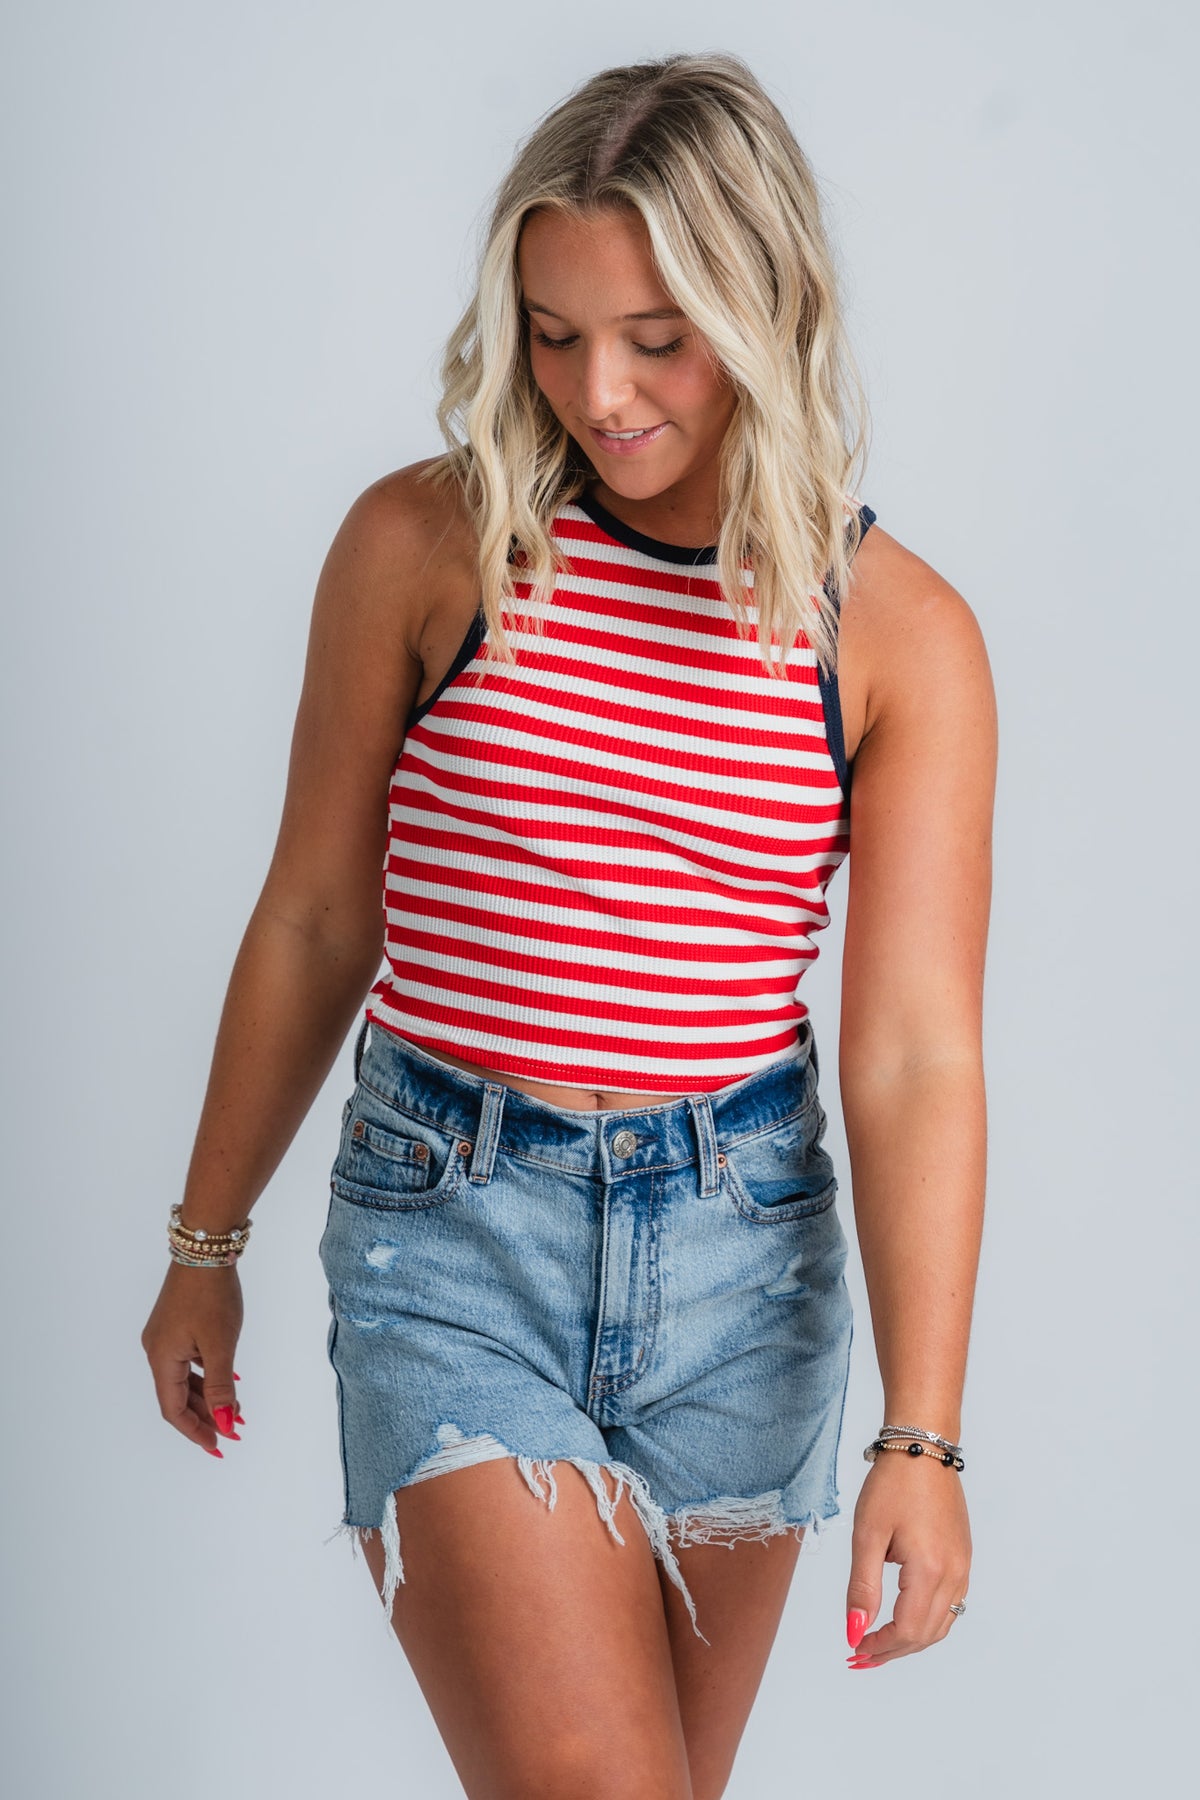 Red white and blue striped tank top - Trendy Tank Top - Cute American Summer Collection at Lush Fashion Lounge Boutique in Oklahoma City